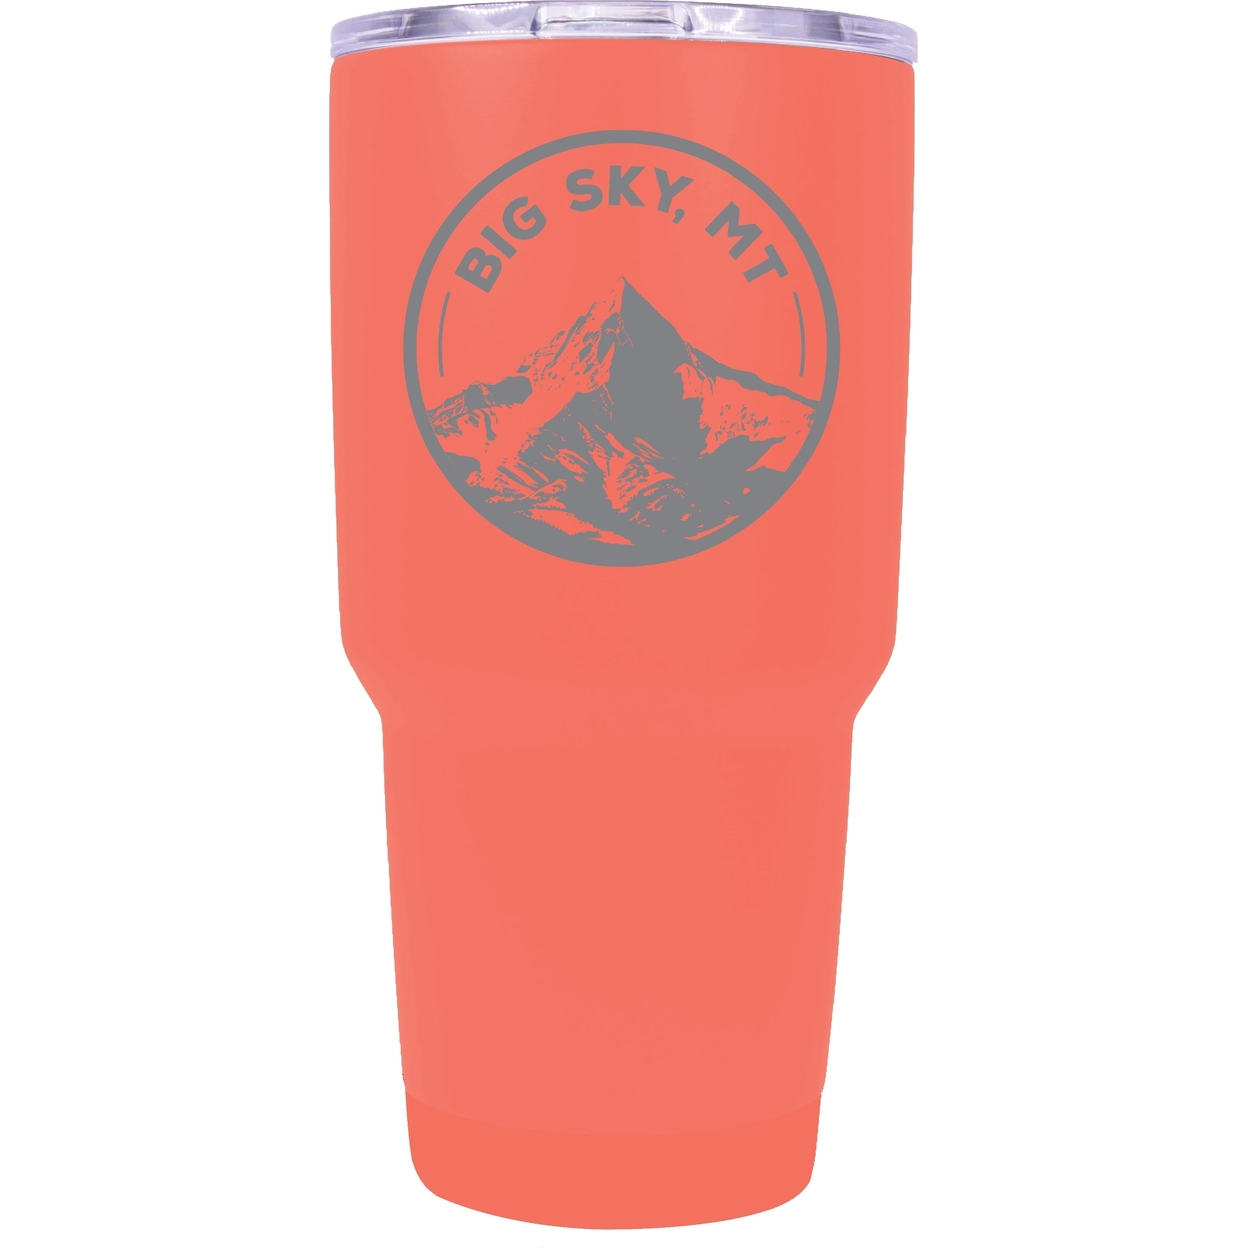 Big Sky Montana Souvenir 24 Oz Engraved Insulated Stainless Steel Tumbler - Coral,,4-Pack